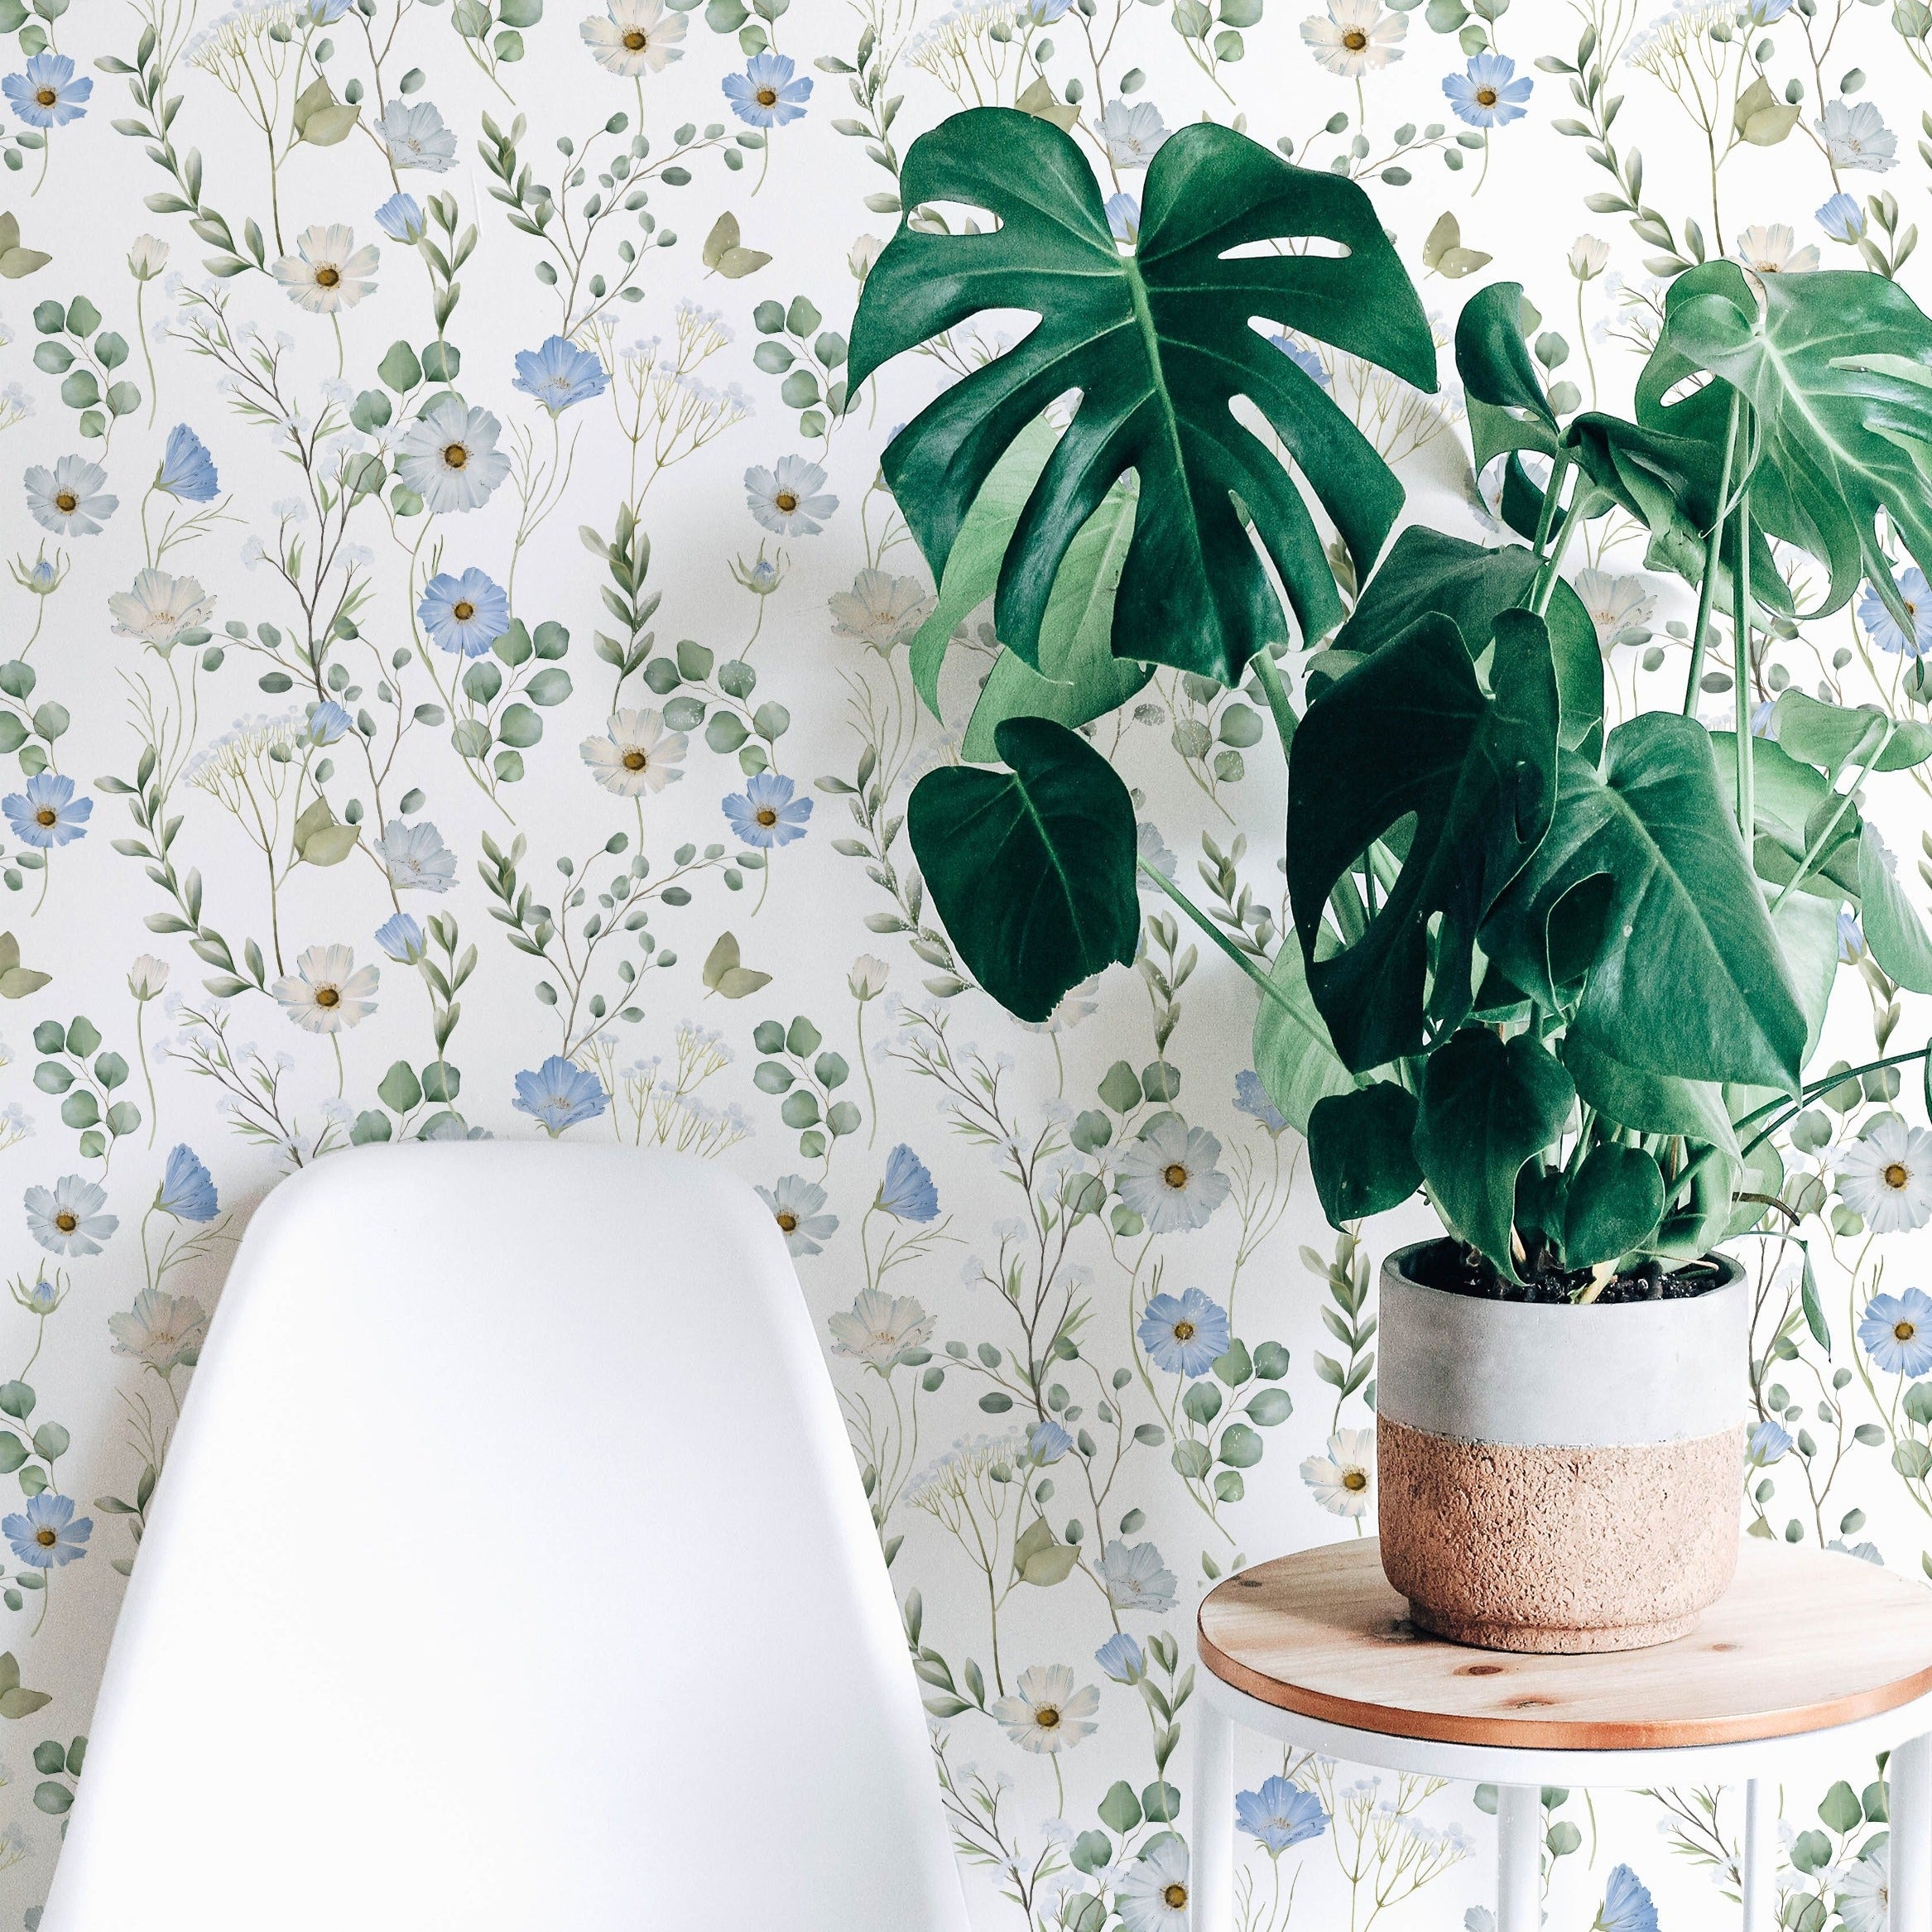 A cozy home office corner is brightened by the Florist Wallpaper, with its lush floral design providing a tranquil backdrop for a white chair and a wooden side table with a potted plant, blending natural elements for a refreshing workspace.